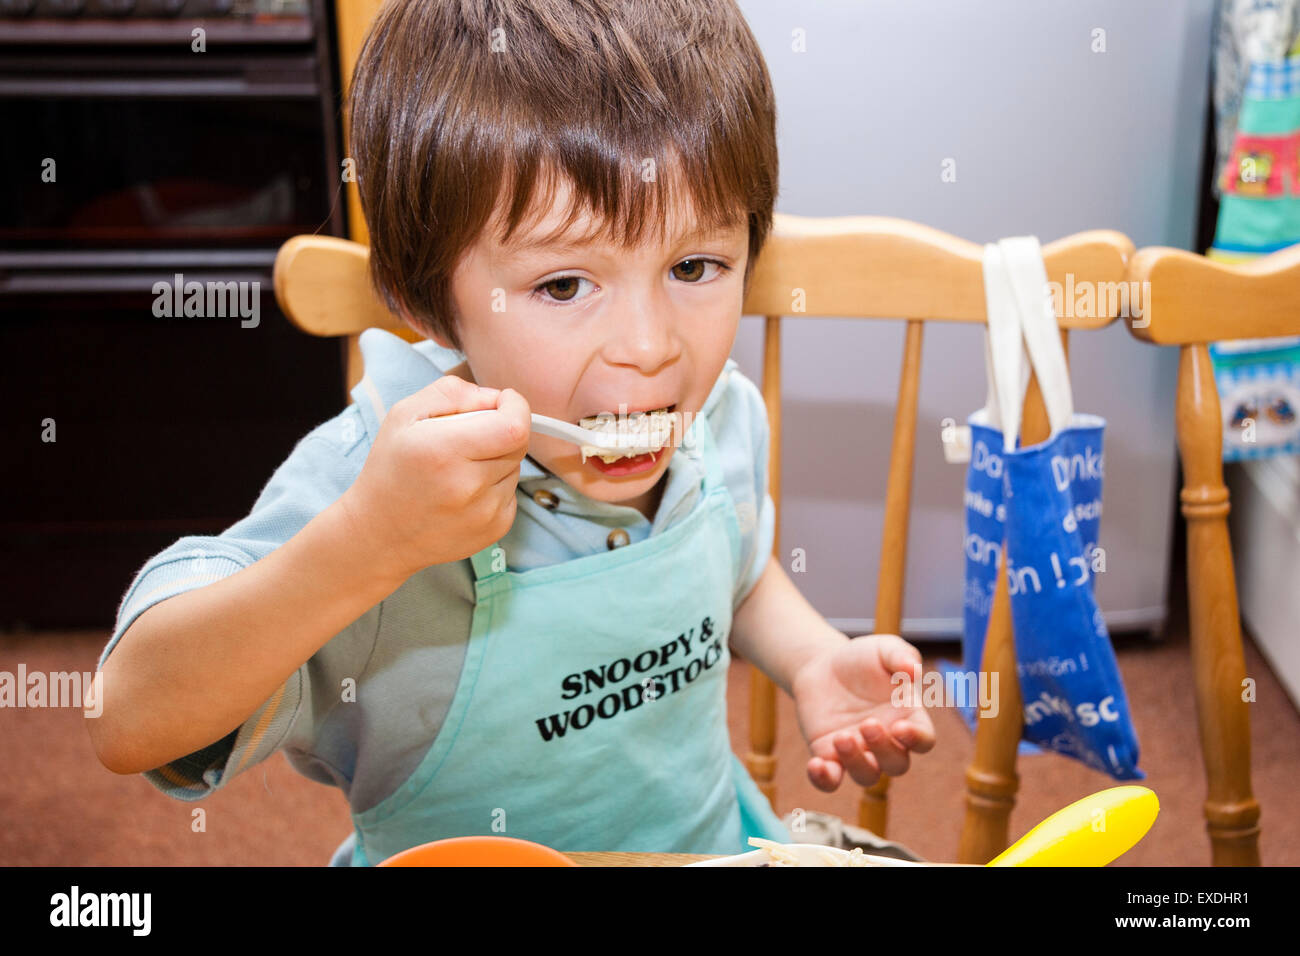 Caucasian child, boy, 4-5 year old, sitting indoors at the dinner table stuffing a spoonful of pasta into his mouth. Wears a cooking apron. Stock Photo